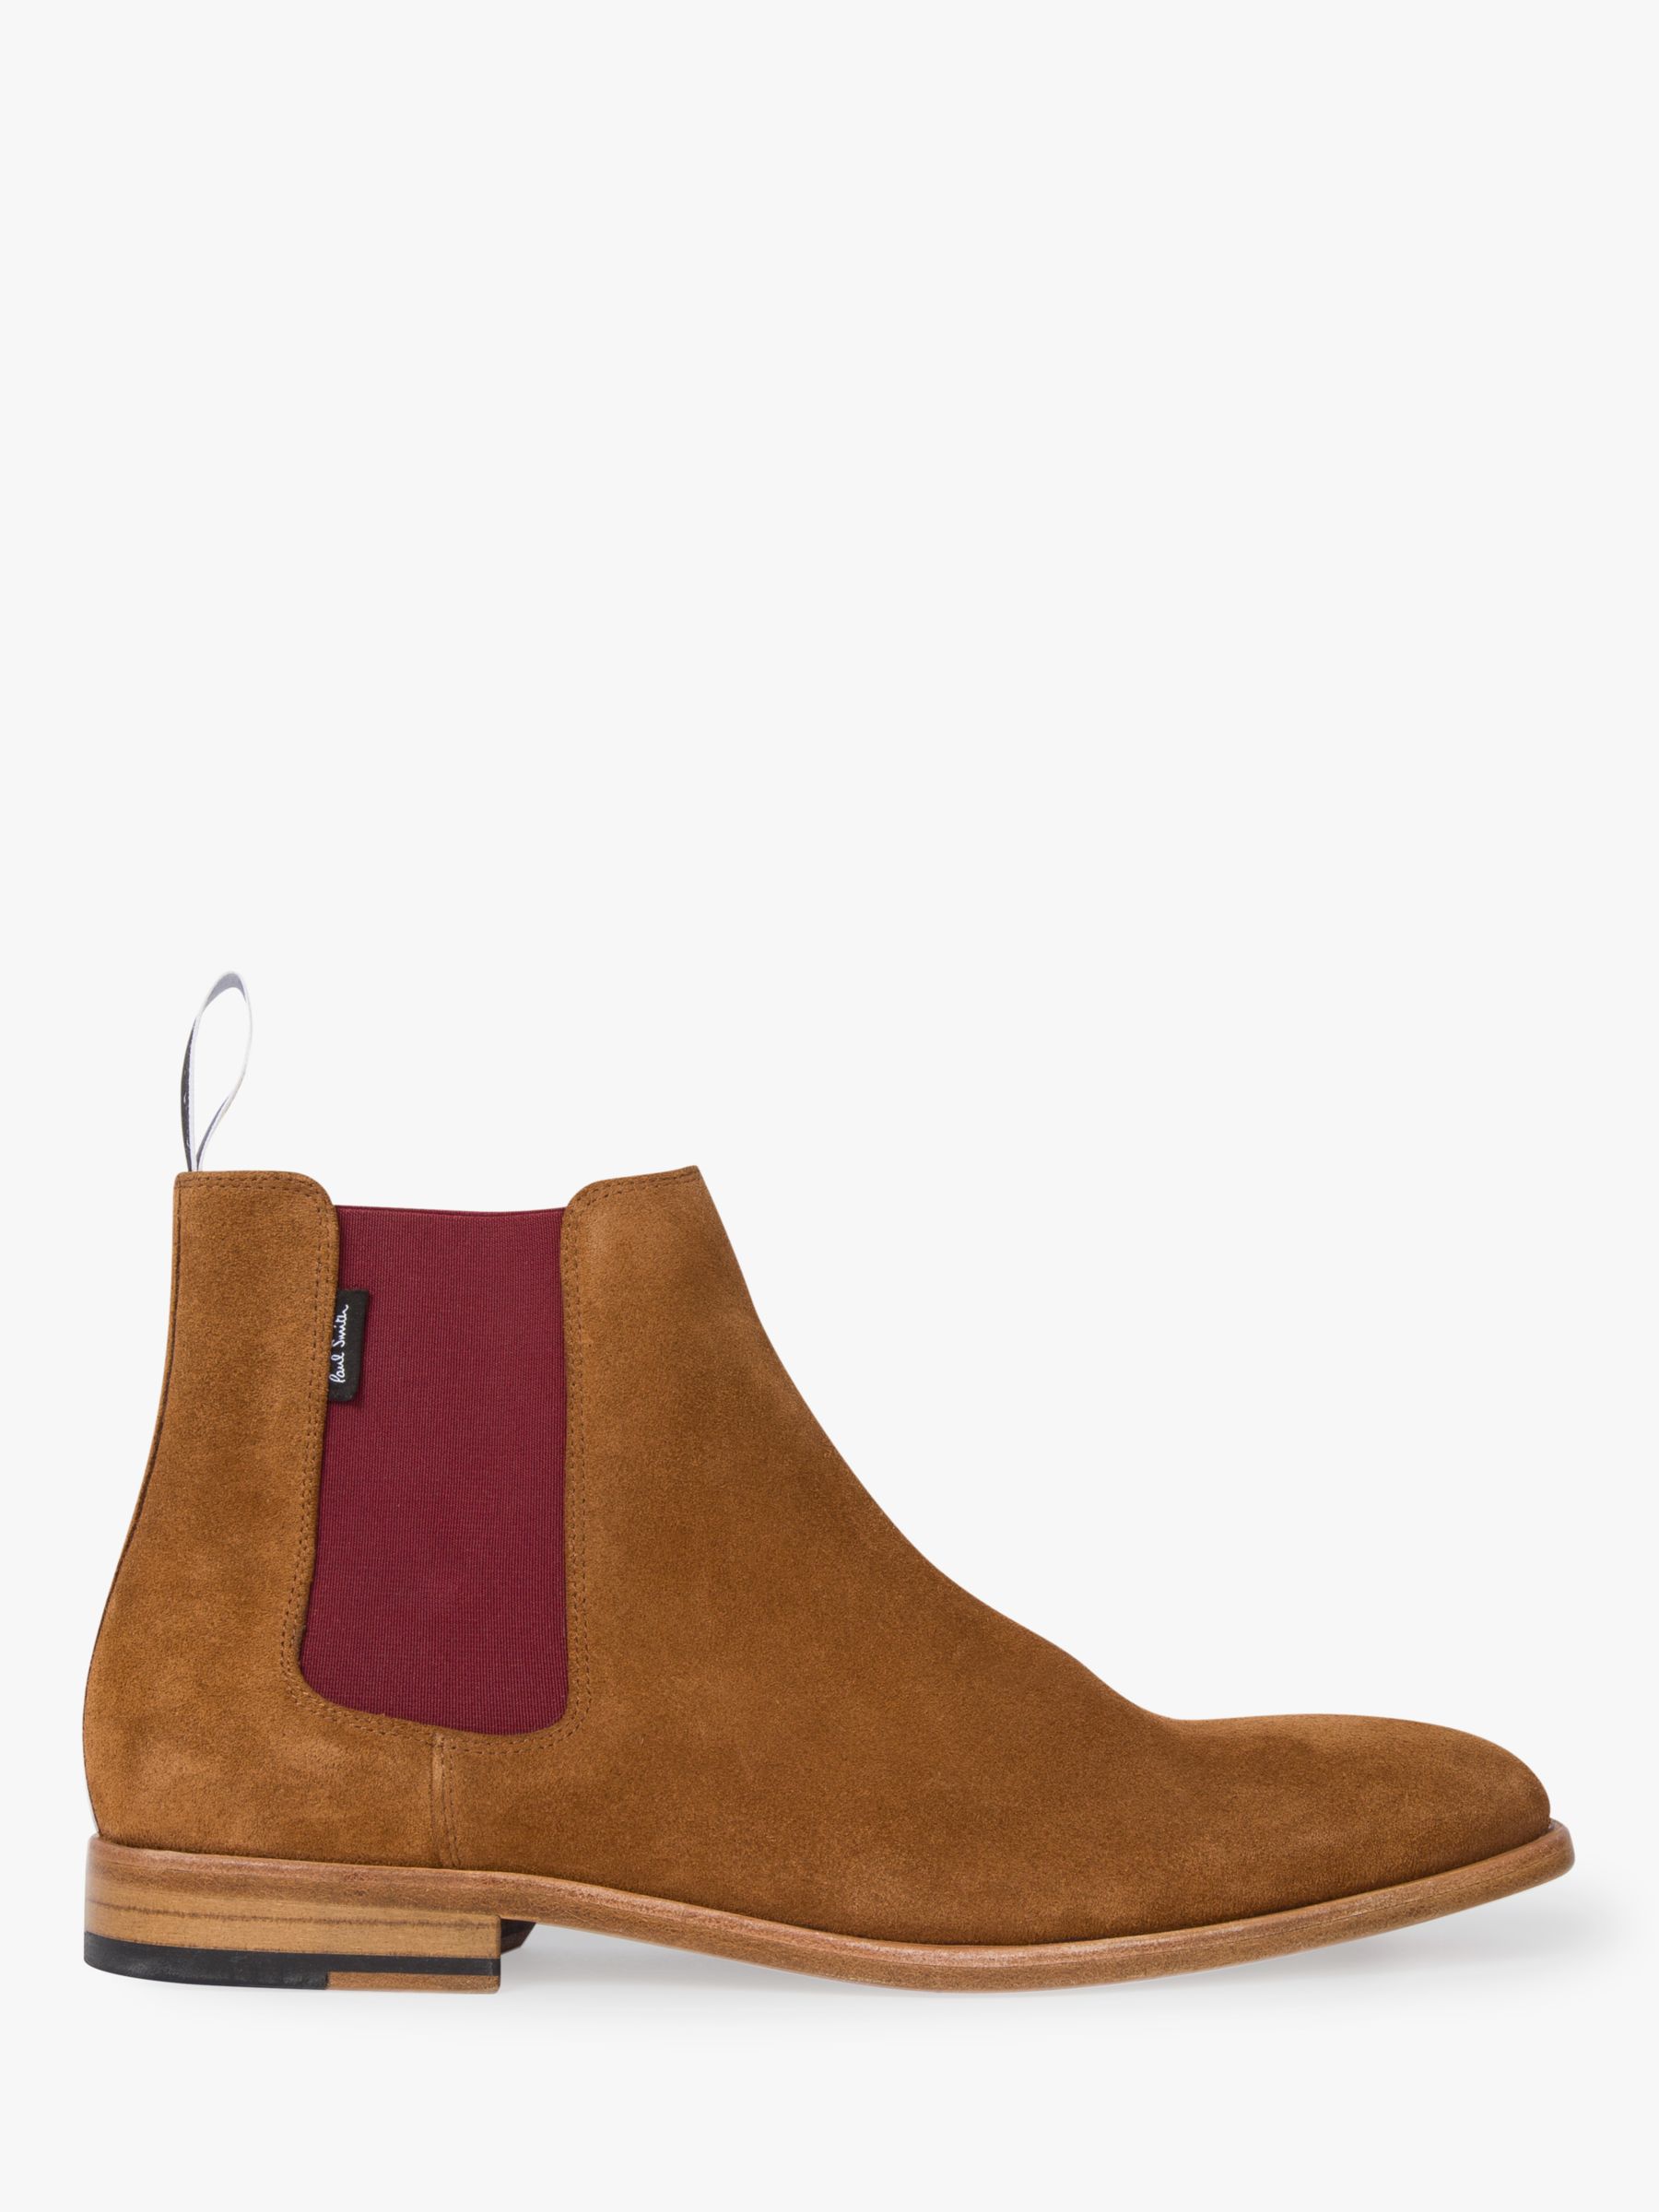 paul smith mens chelsea boots